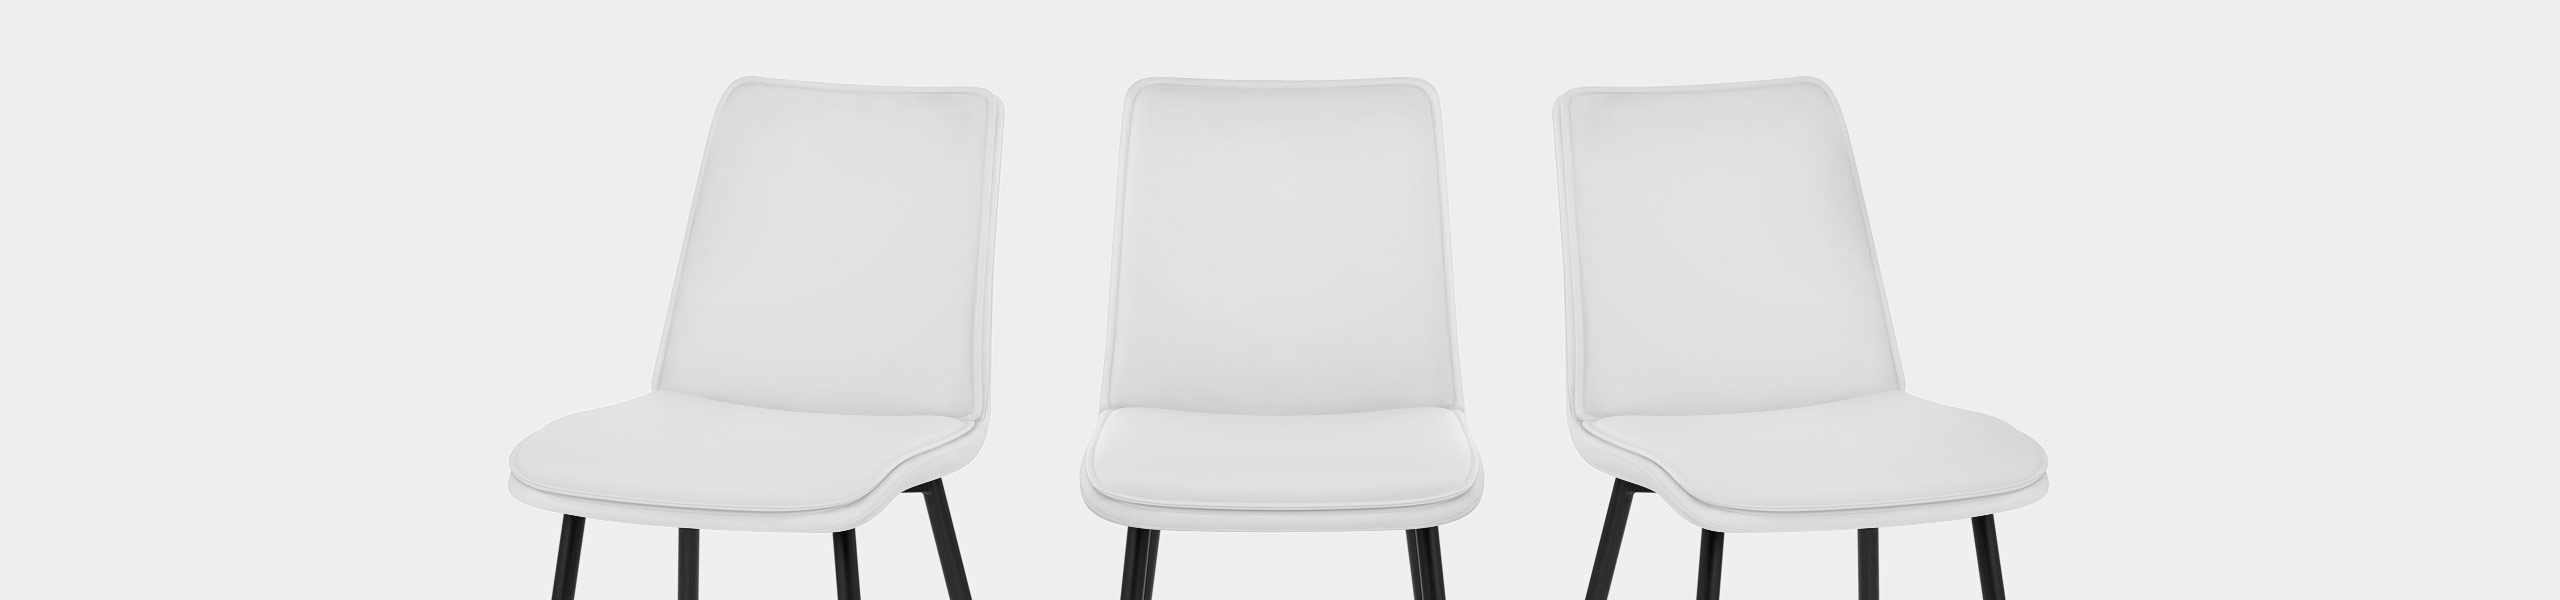 Abi Dining Chair White Video Banner